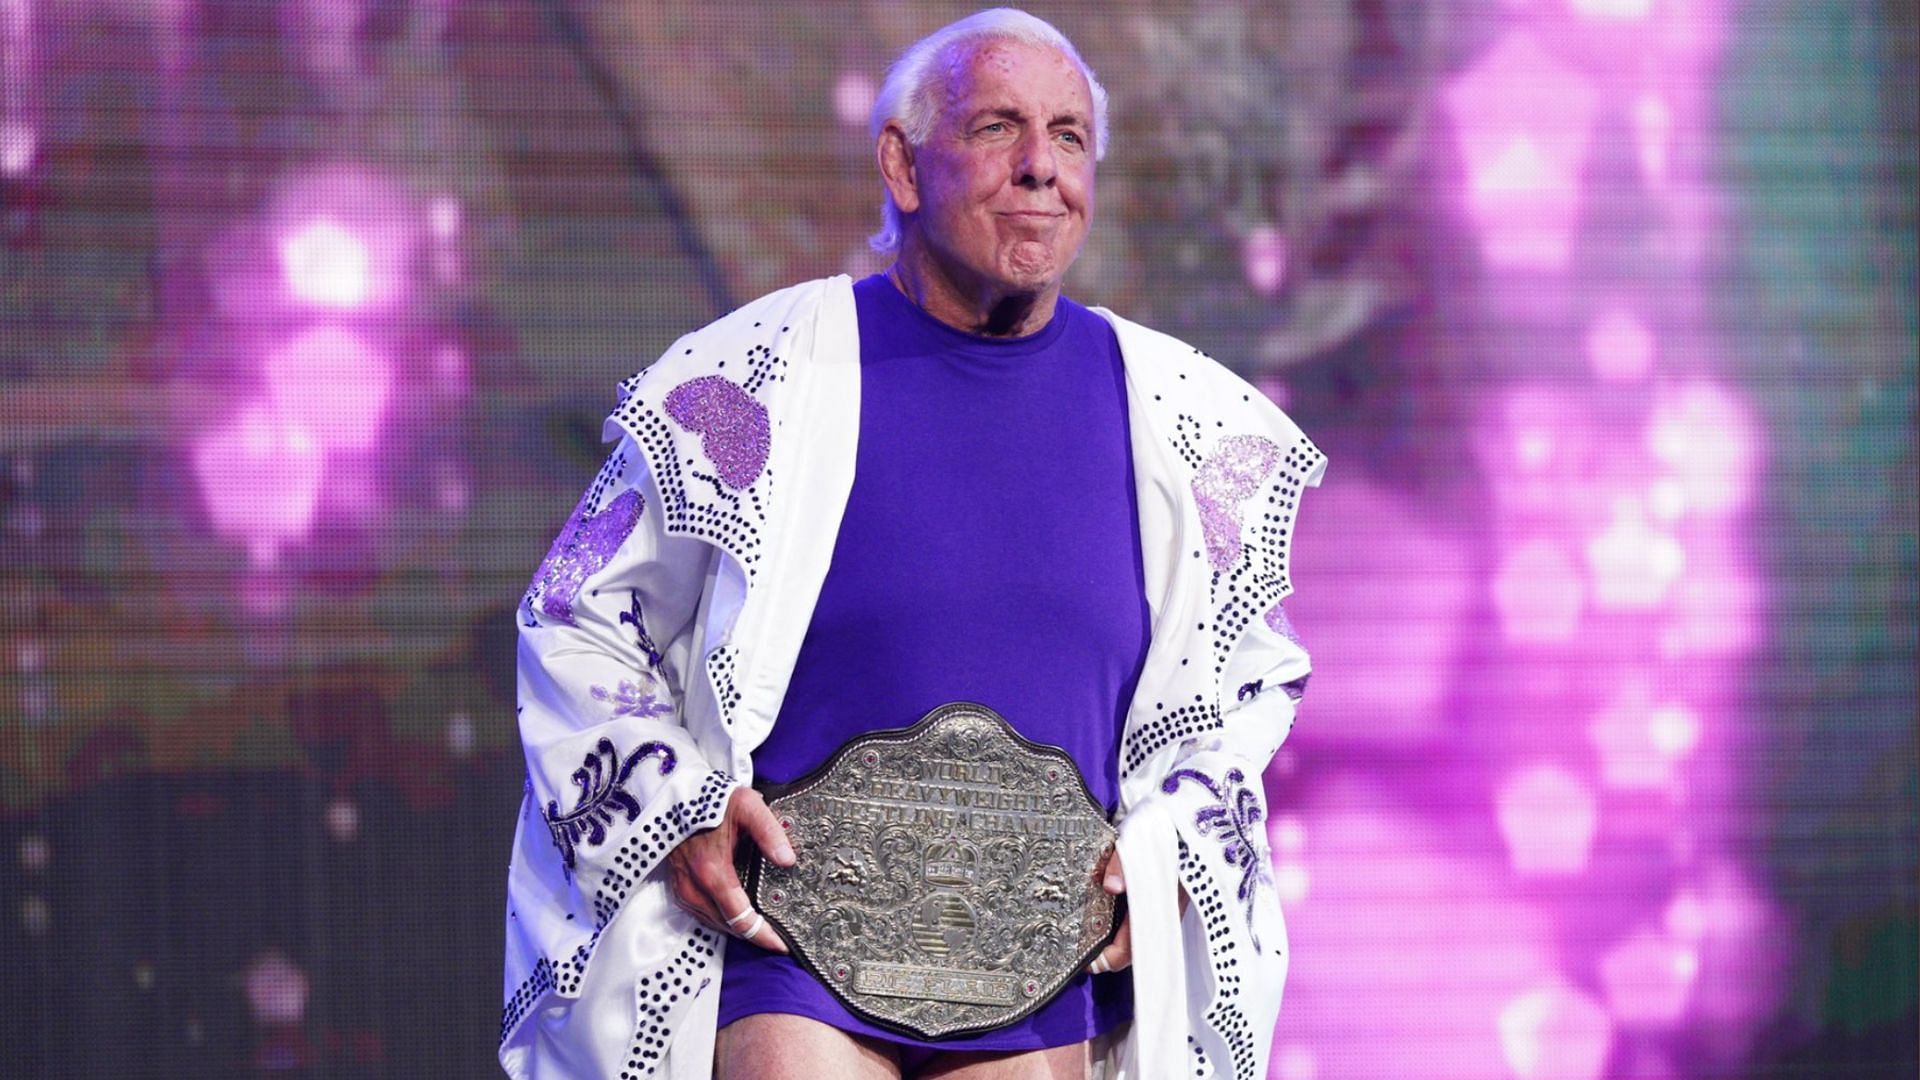 Ric Flair during his last match on July 31st